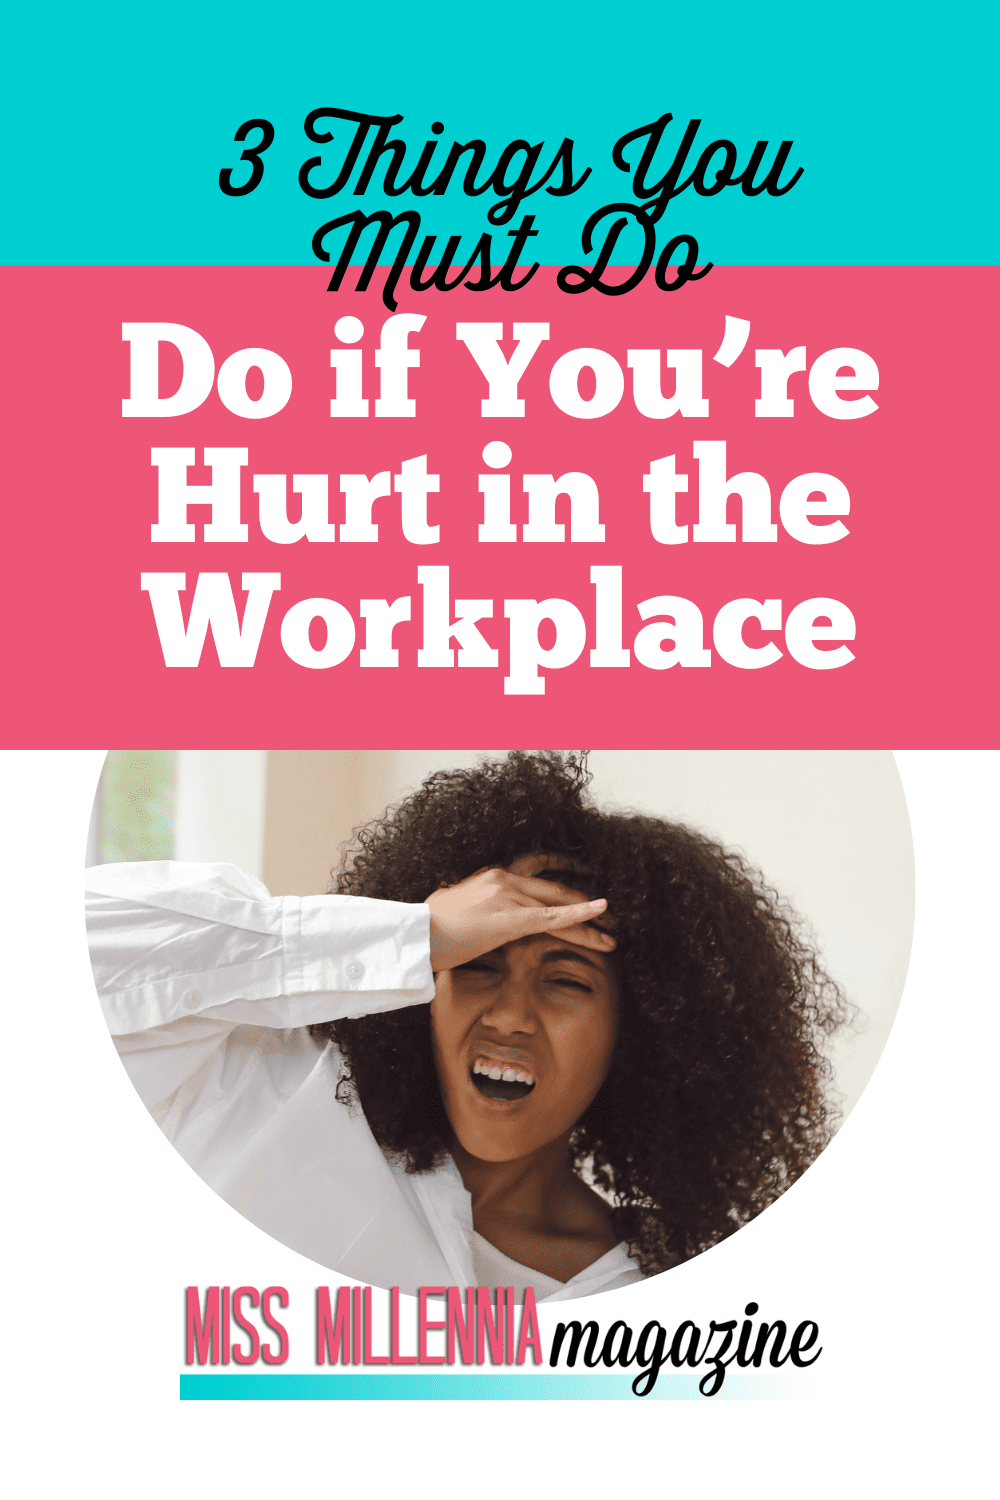 3 Things You Must Do if You’re Hurt in the Workplace